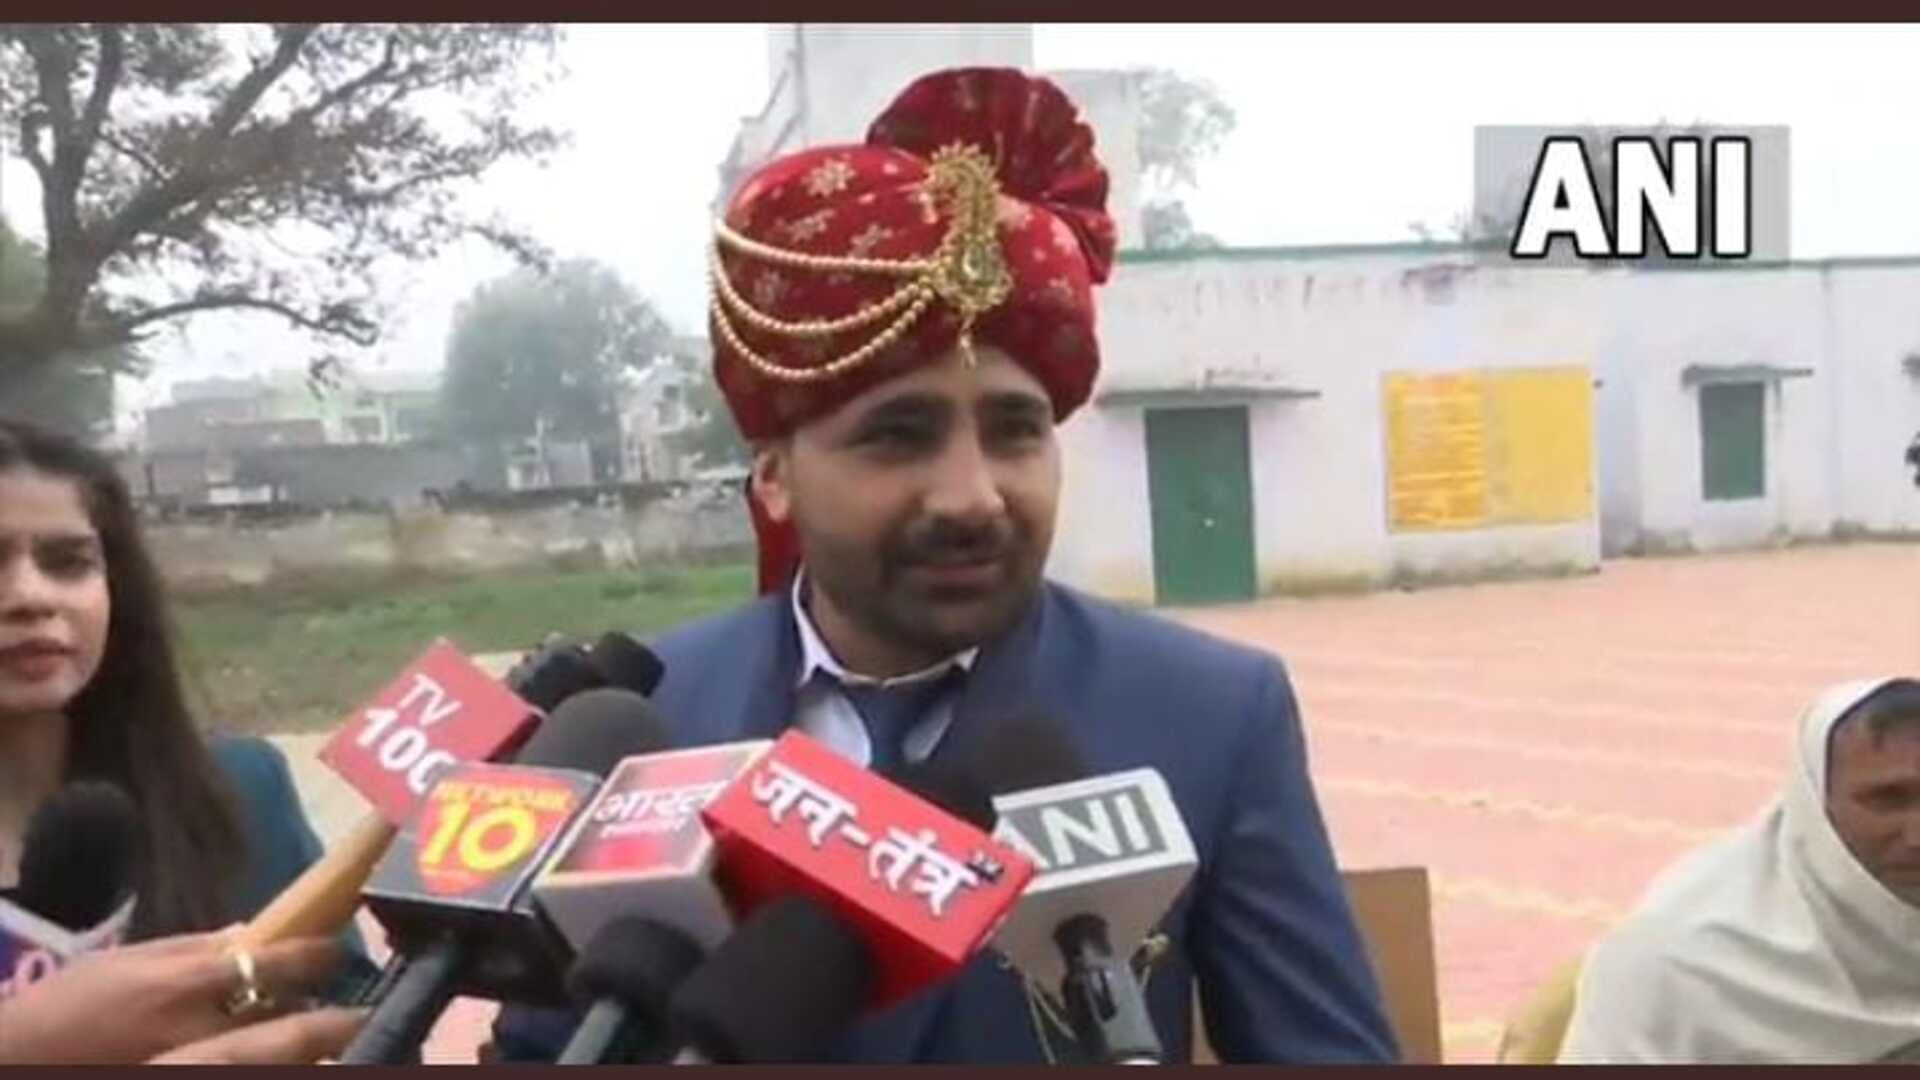 Up assembly election Groom reached at polling booth before his wedding